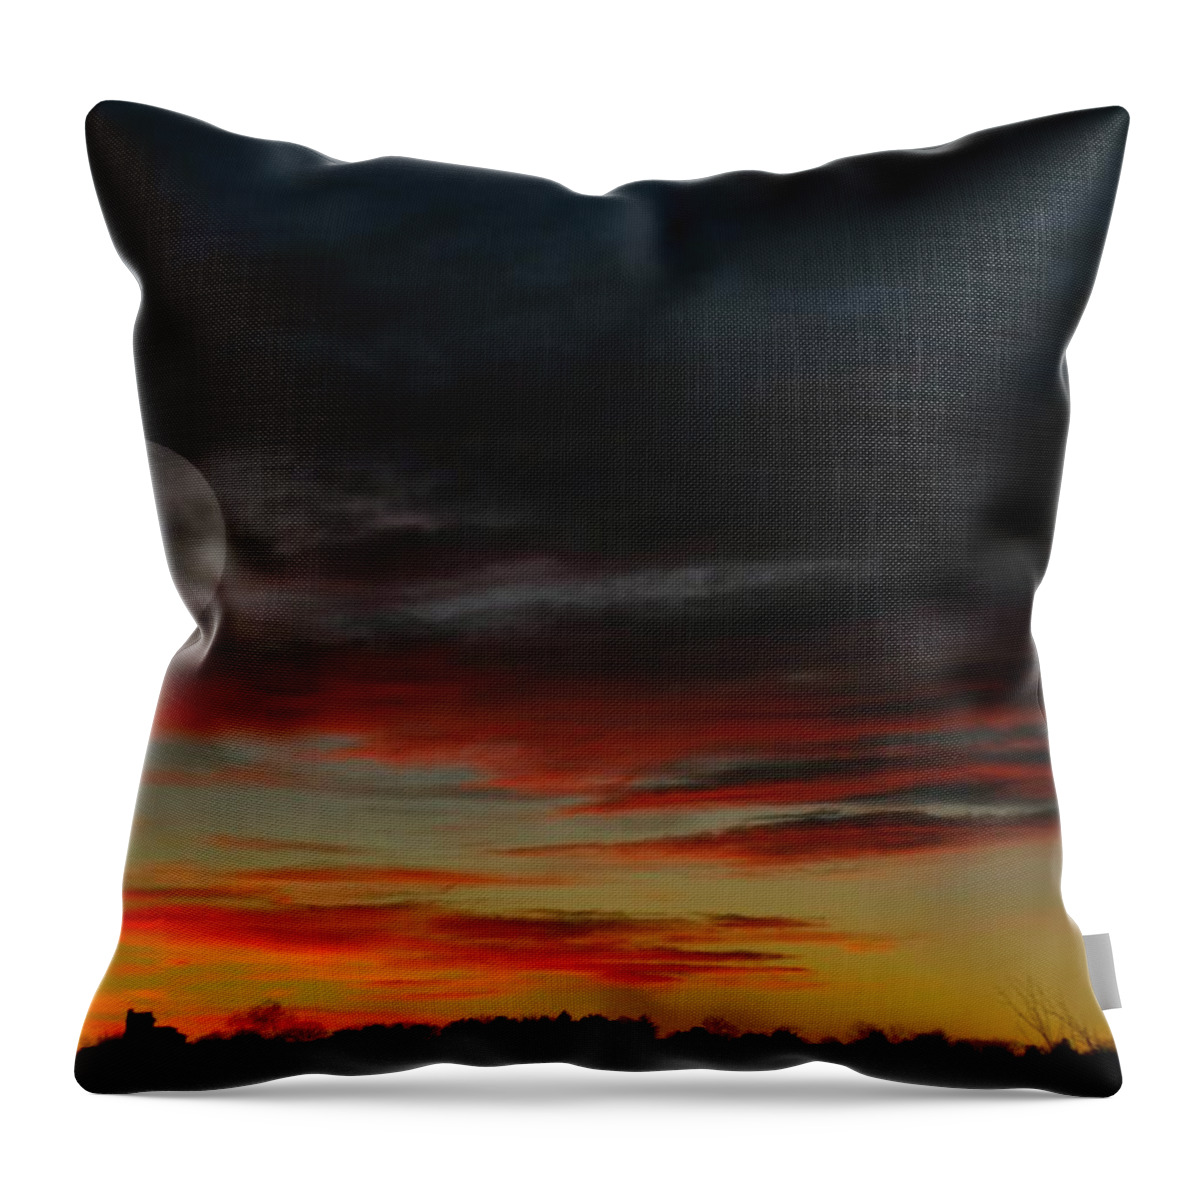 Sunset Throw Pillow featuring the photograph Magical Moon by Diana Angstadt